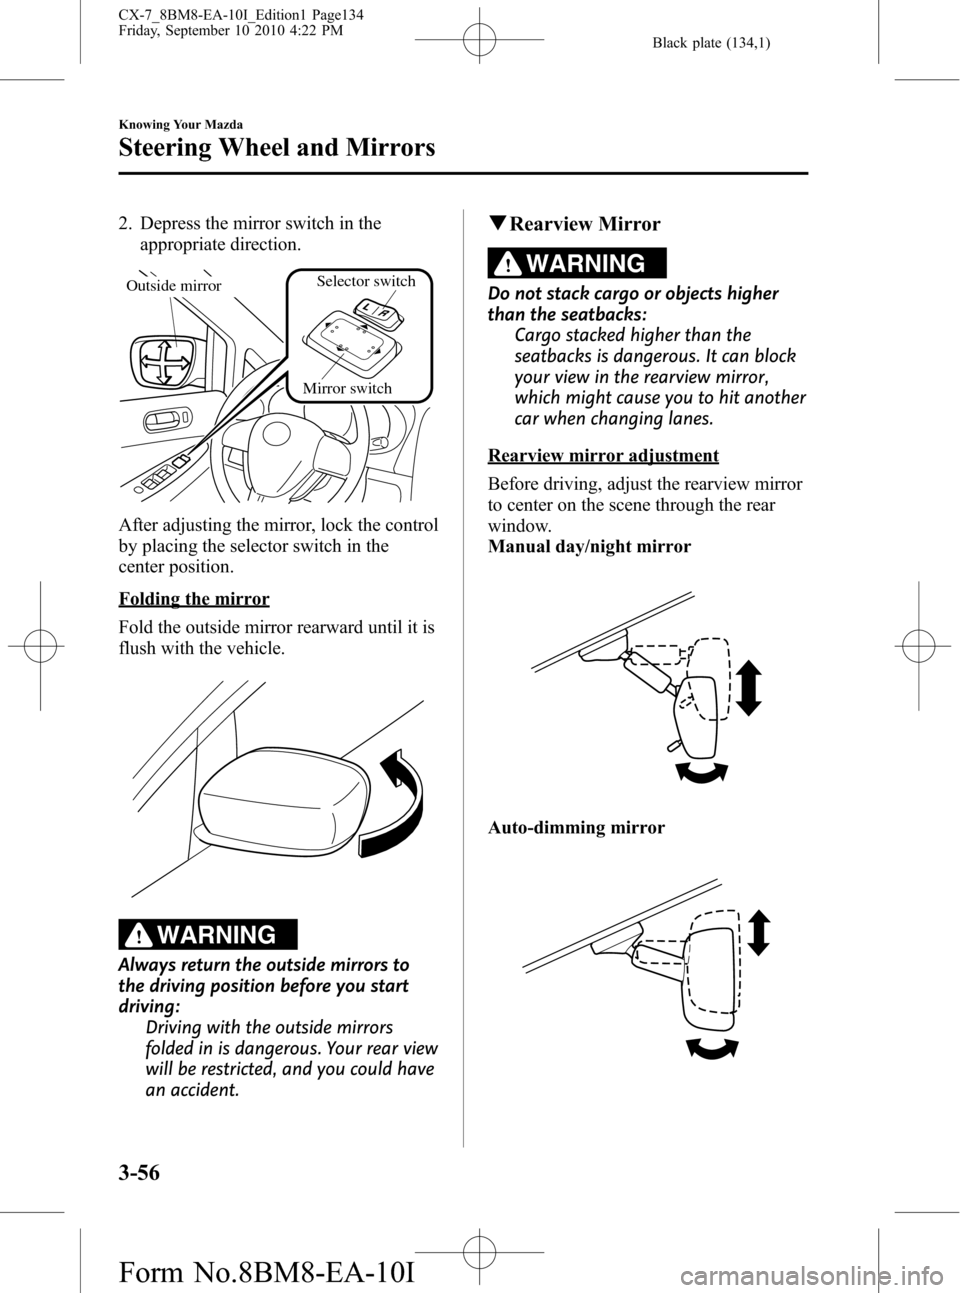 MAZDA MODEL CX-7 2011  Owners Manual (in English) Black plate (134,1)
2. Depress the mirror switch in the
appropriate direction.
Outside mirror
Mirror switchSelector switch
After adjusting the mirror, lock the control
by placing the selector switch i